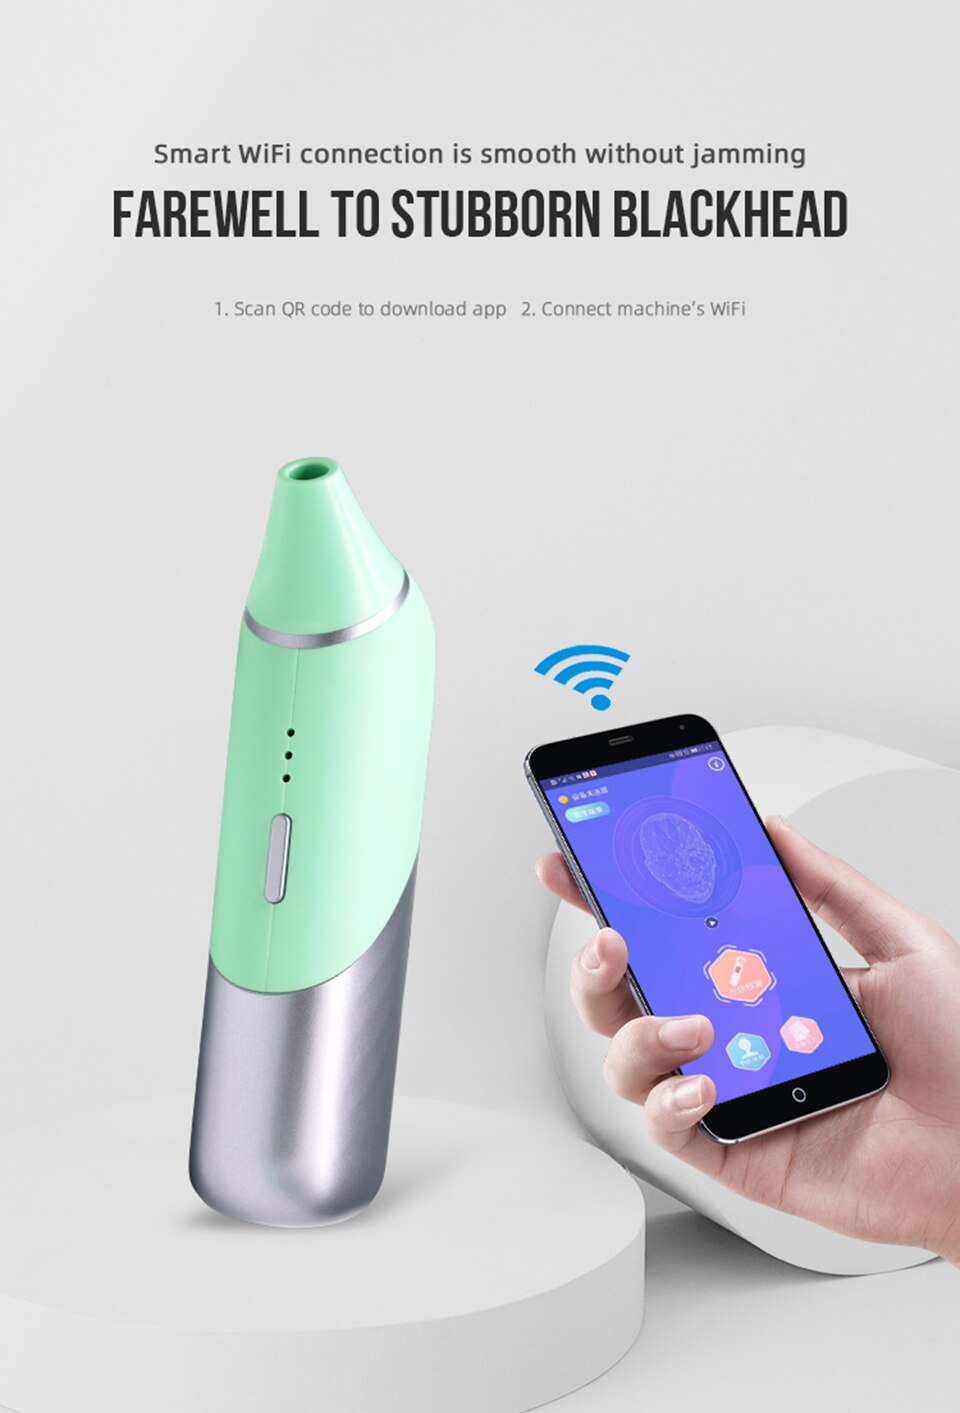 KOLI Arrival Smart WIFI Visual Blackhead Remover Vacuum Suction Pore Cleaner Builtin 20X 5.0MP Camera Acne Removal Cleaning Tool